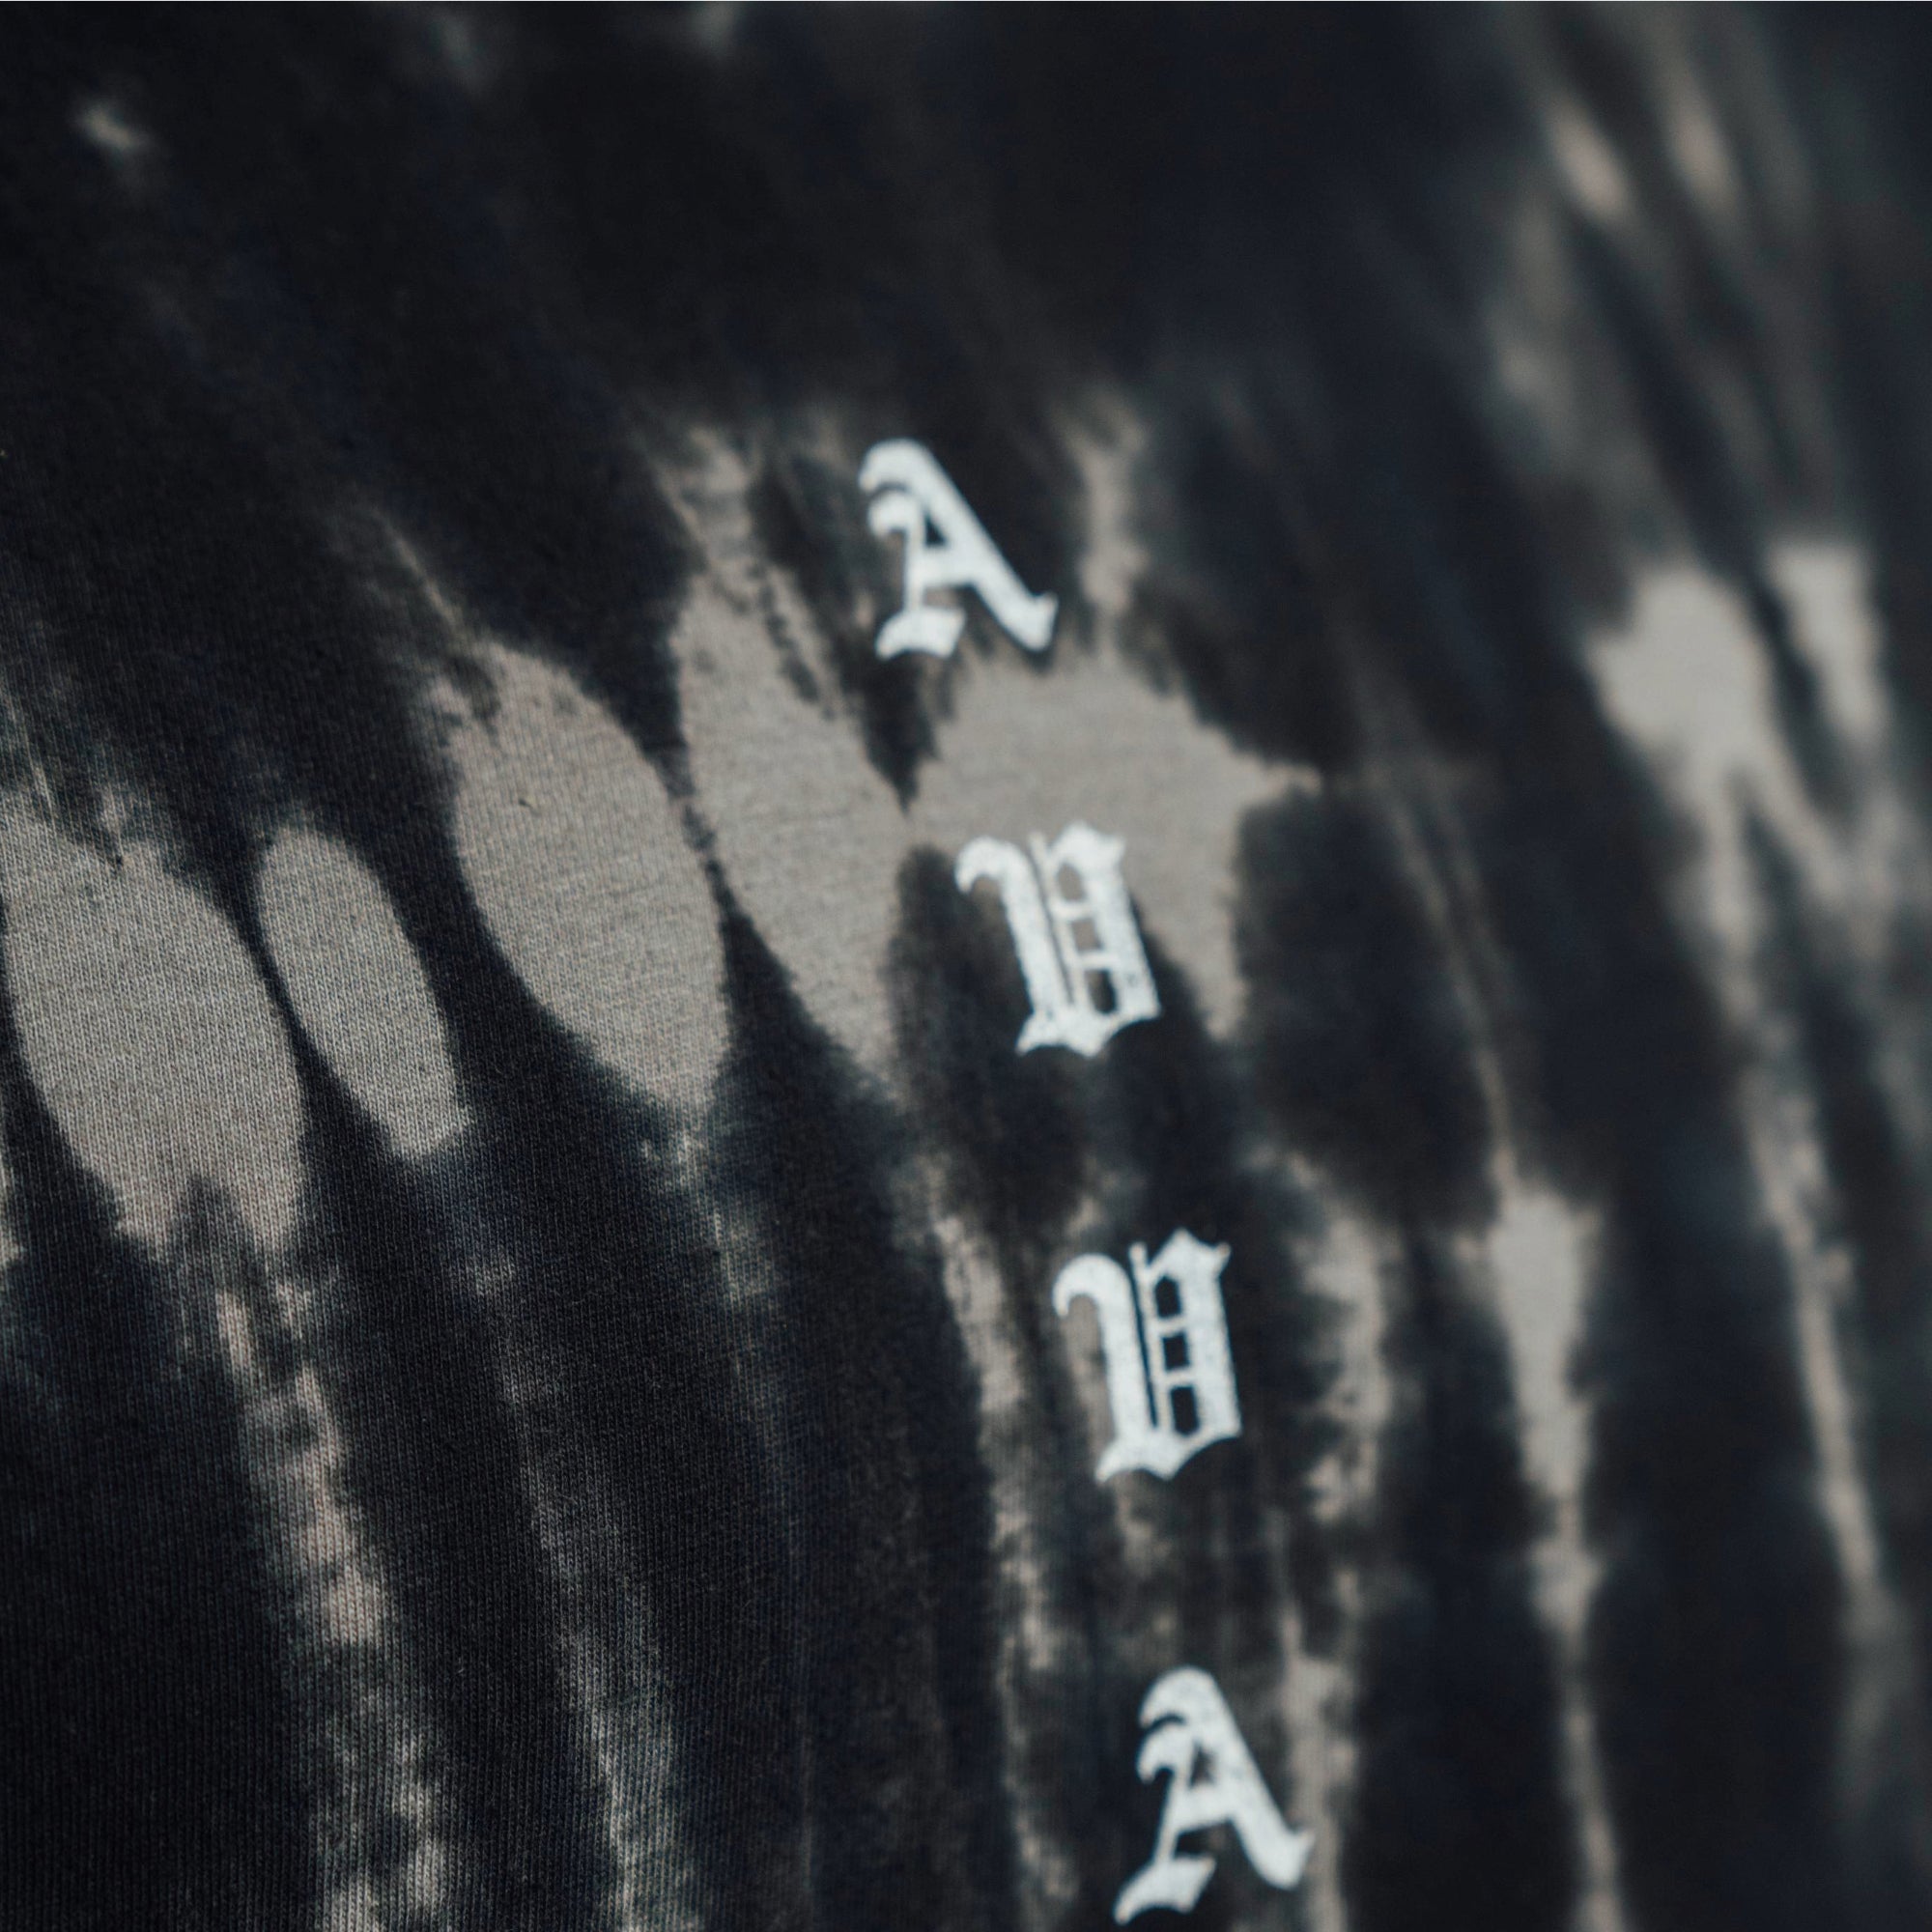 CLOSE UP OF AVVA LOGO ON THE SALTWATER TEE. AVVA LOGO GOES DOWN THE MIDDLE.